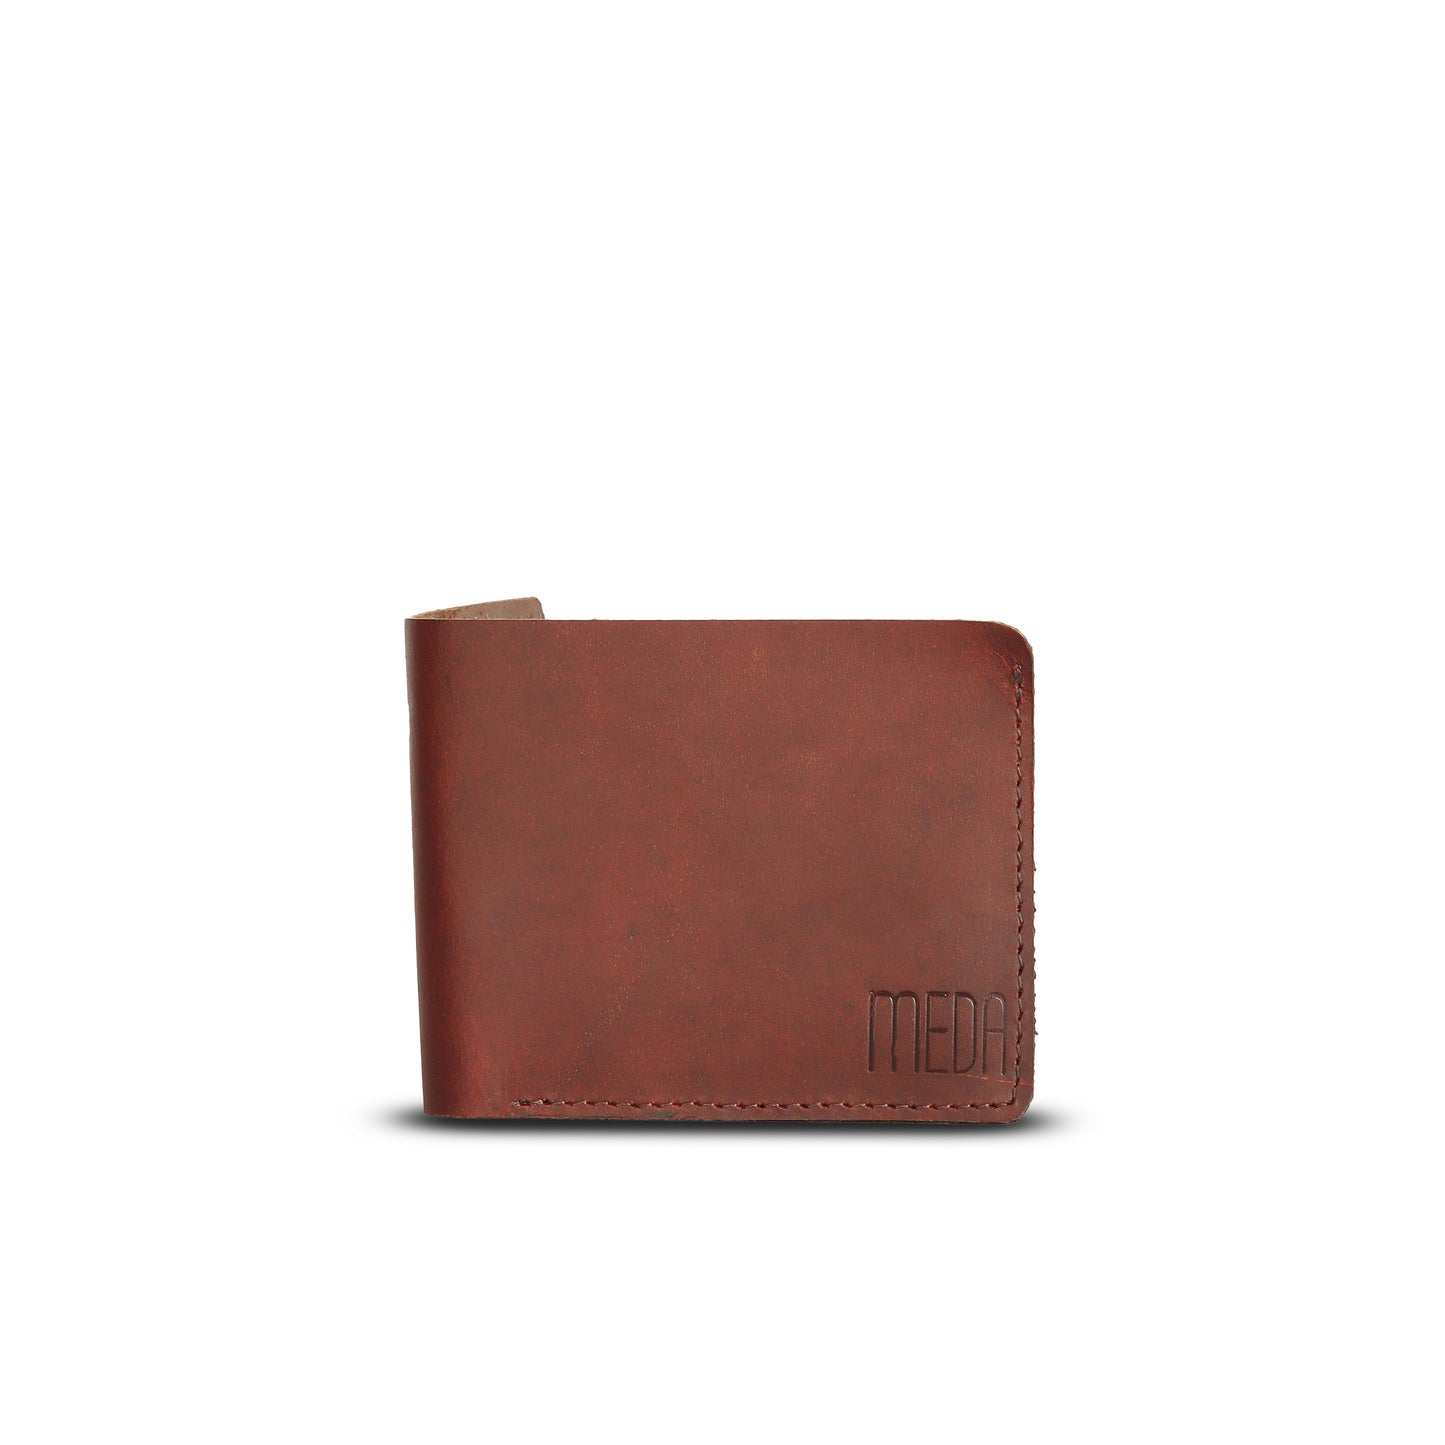 Mini Pocket Glam Leather Wallet Tan Touch